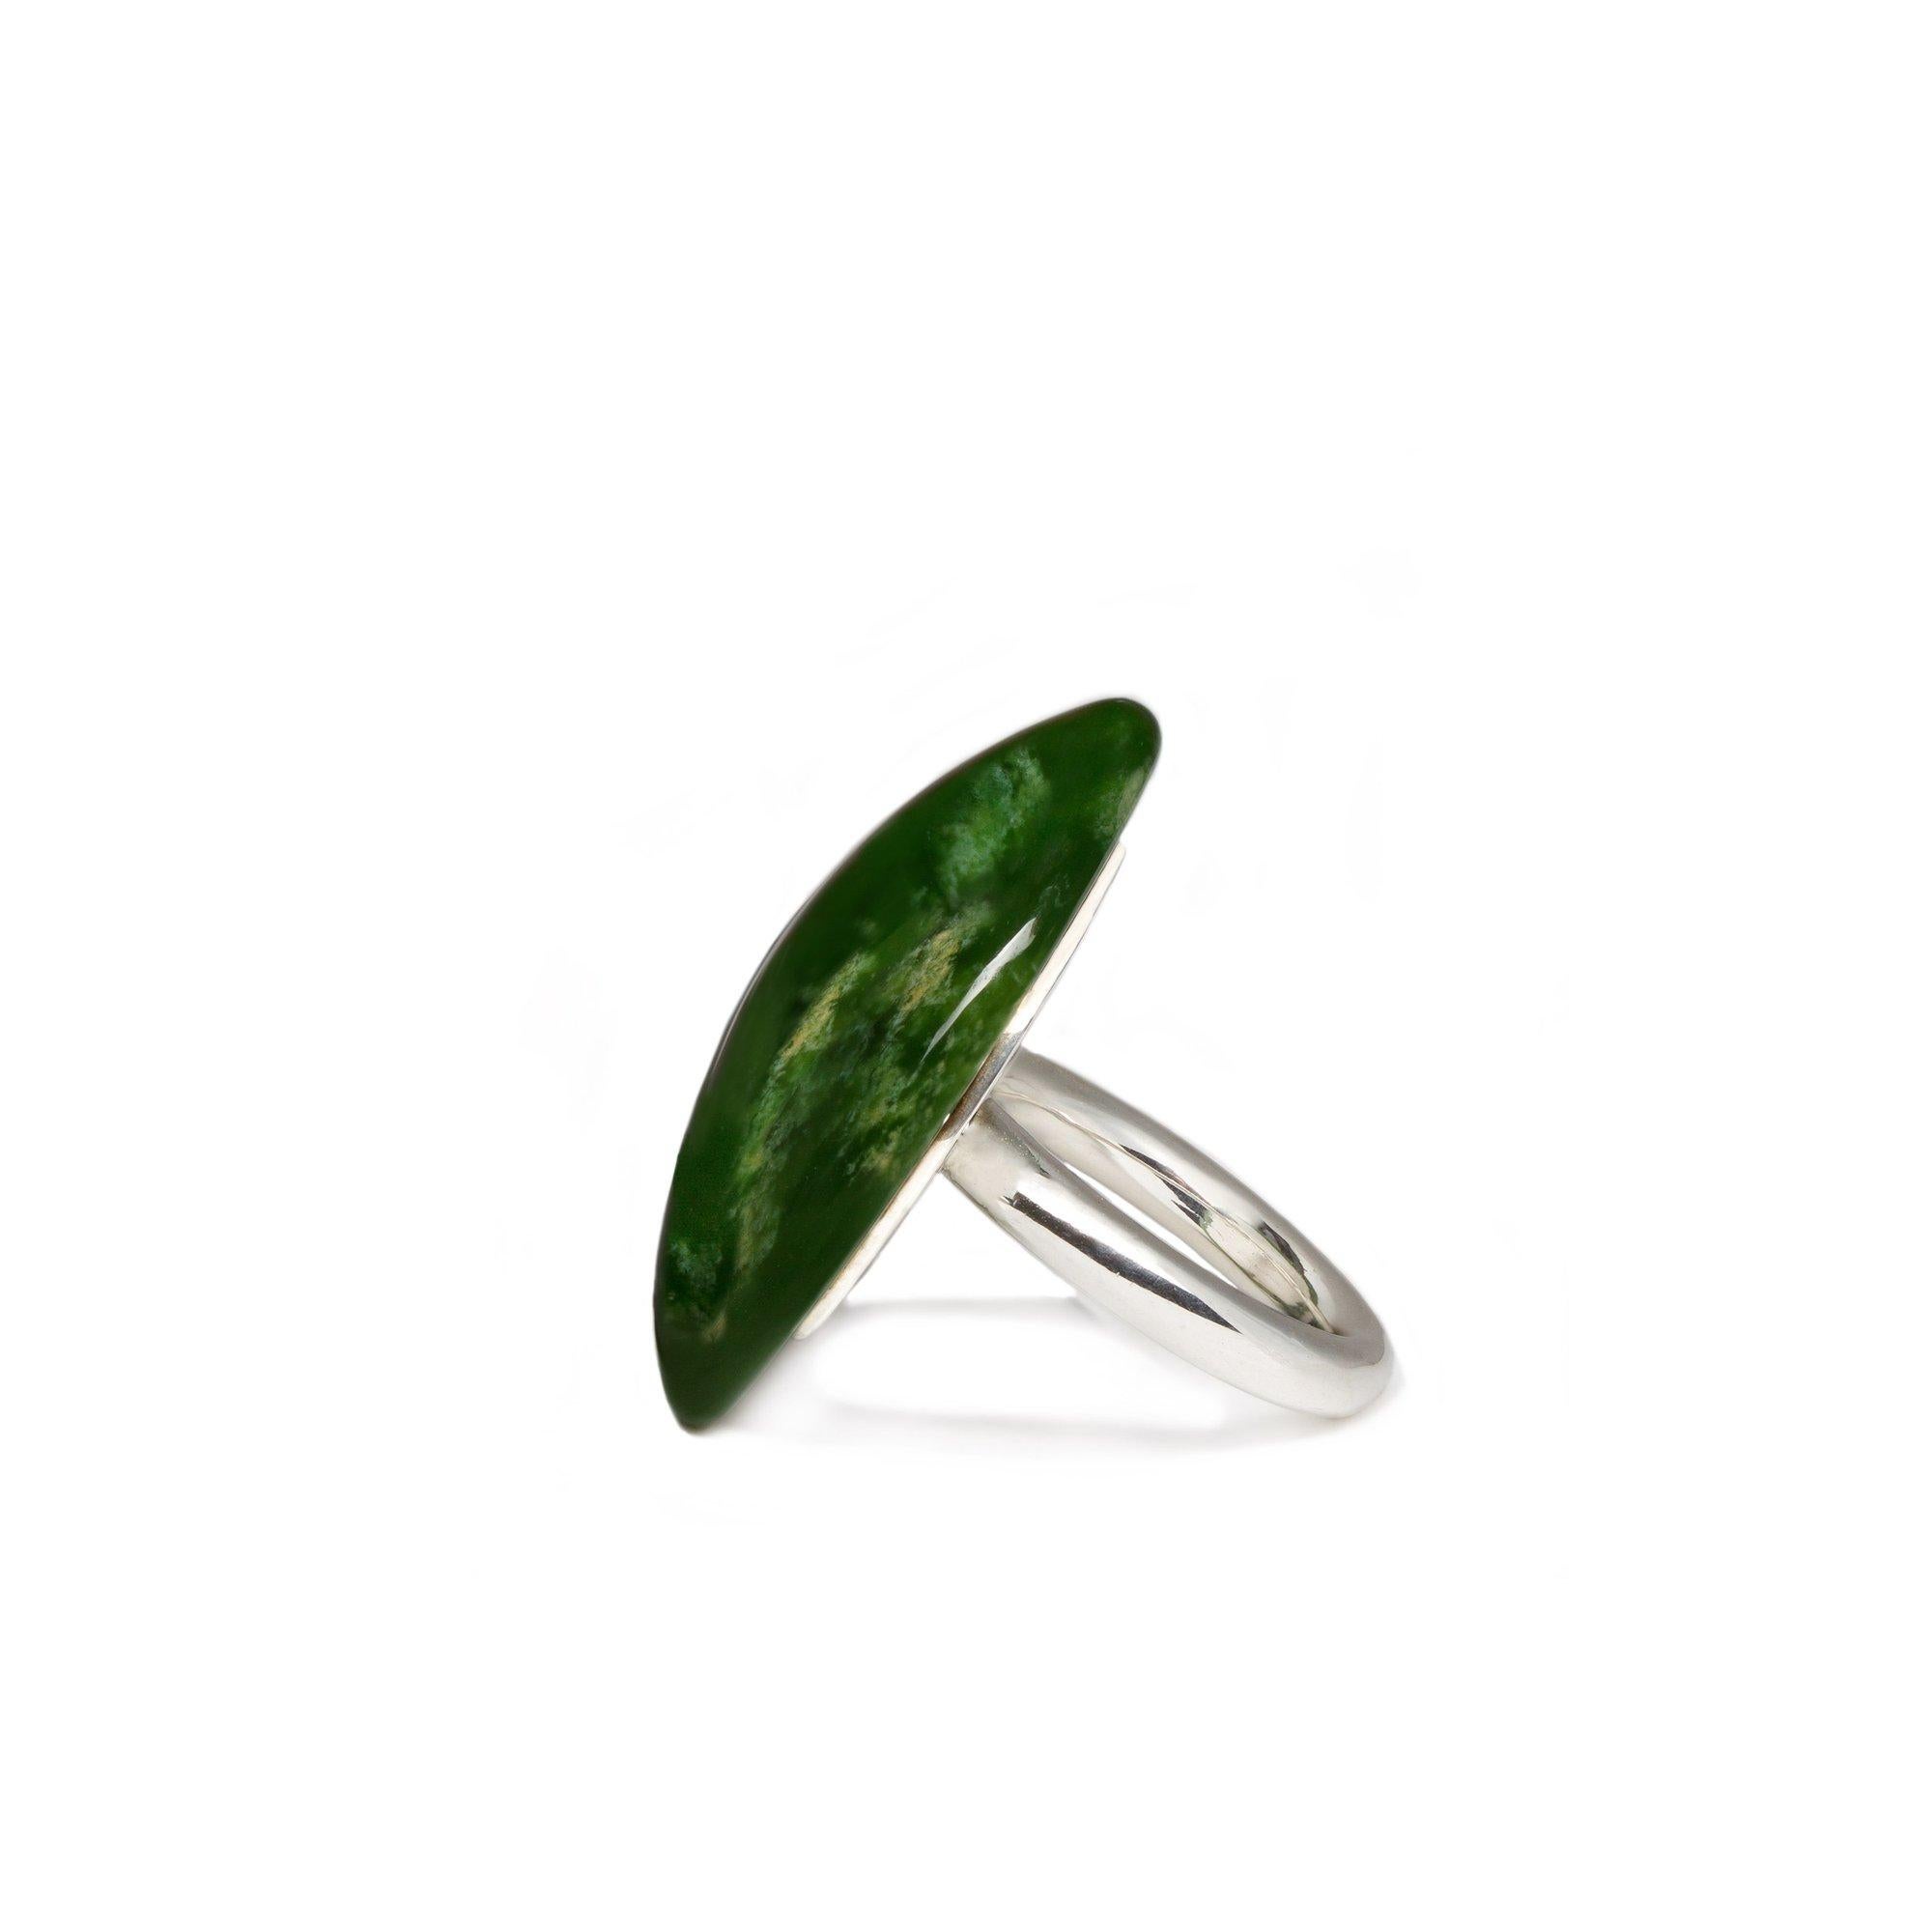 
This immaculate polished greenstone ring has been carved from New Zealand by a local artist. This Flower Jade Dome Ring stands out in the Sterling Silver. And Pounamu means green gem in New Zealand.  